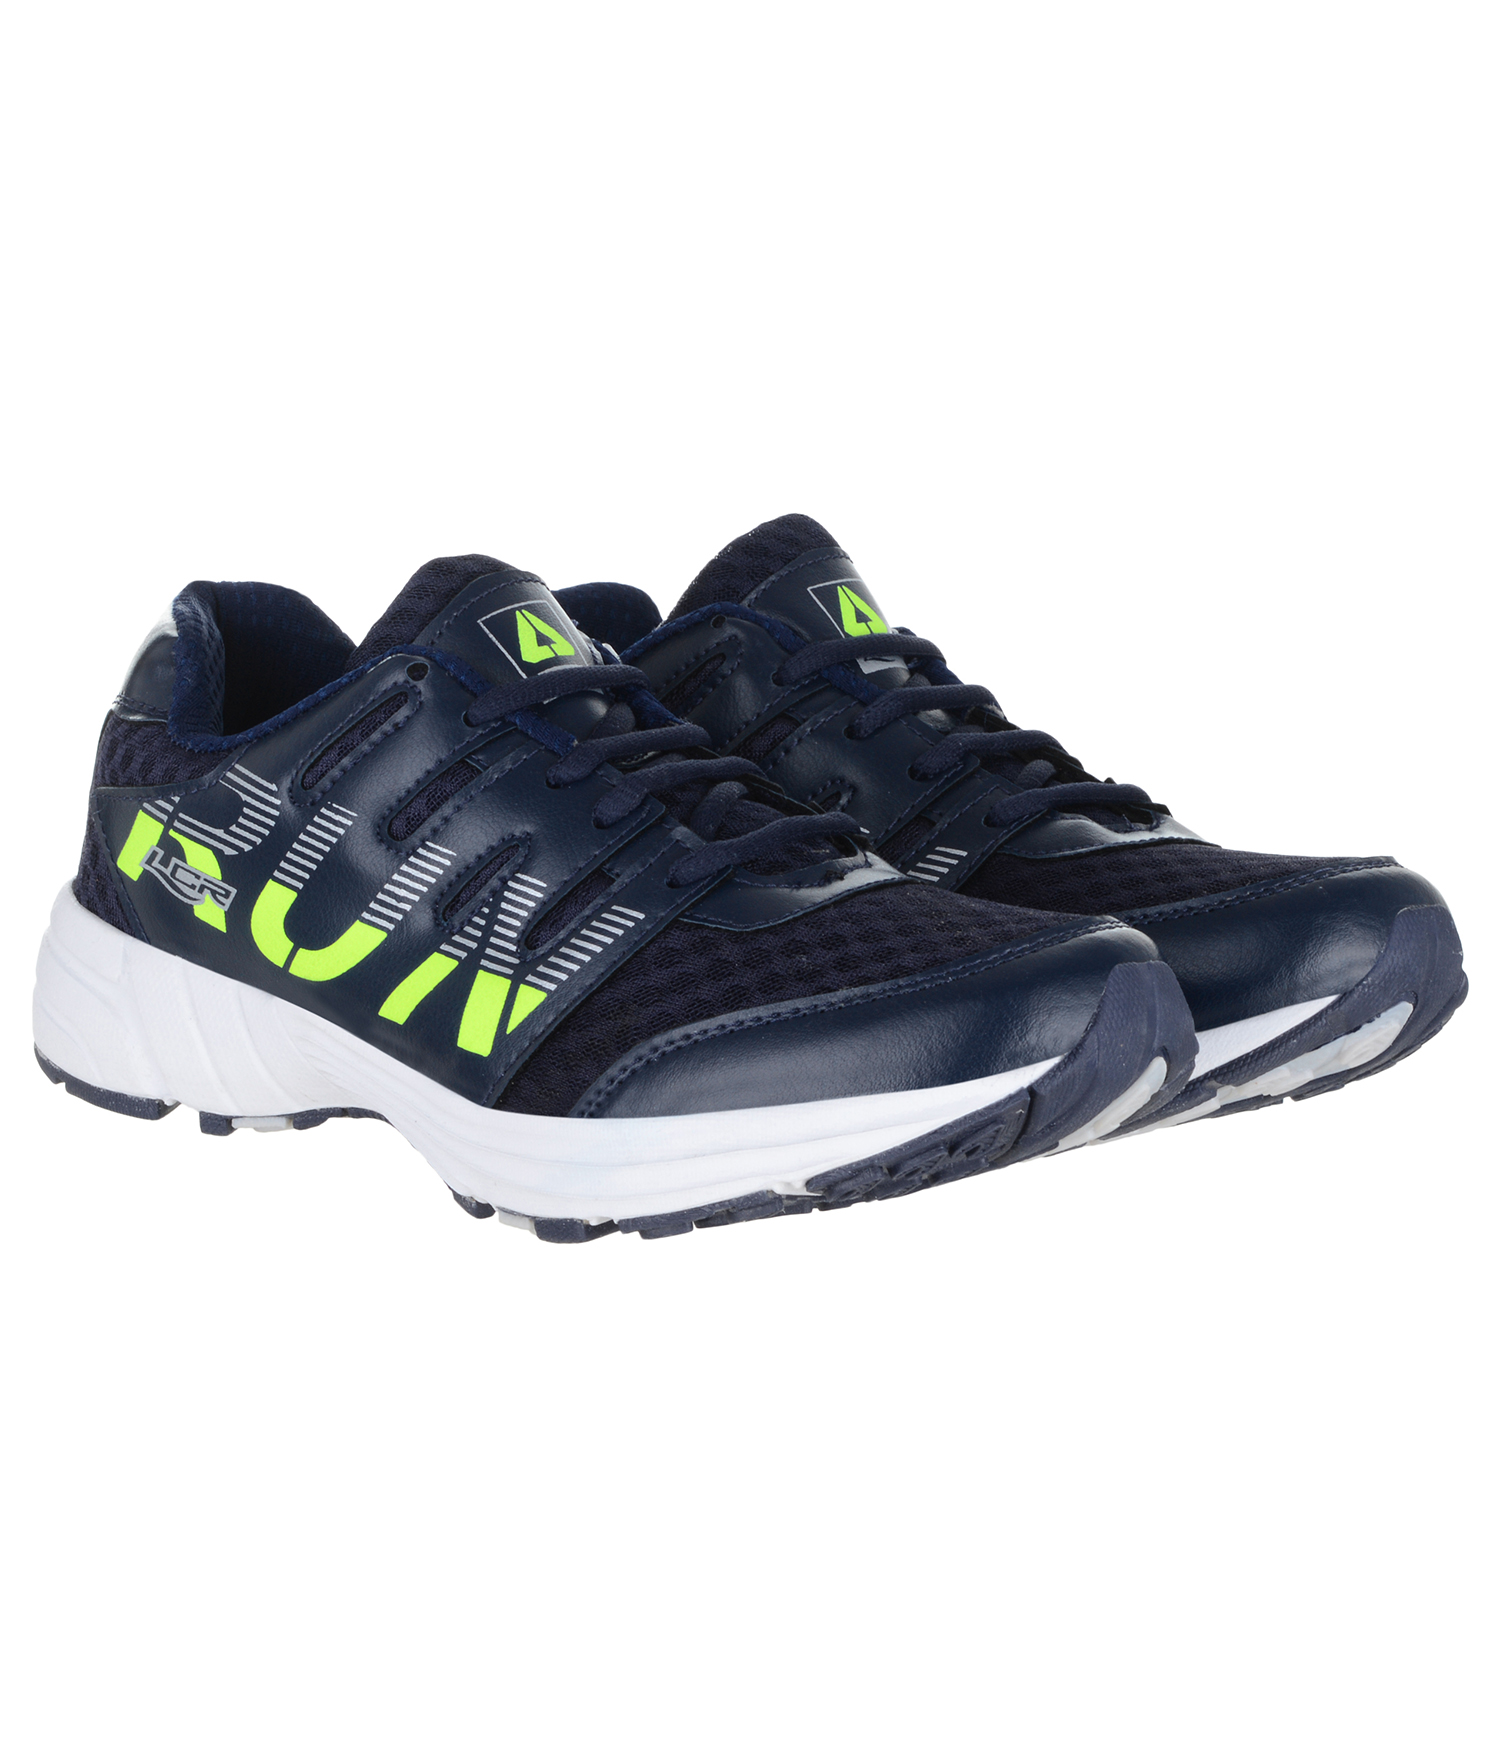 Buy Lancer Navy Green Shoes Online @ ₹999 from ShopClues